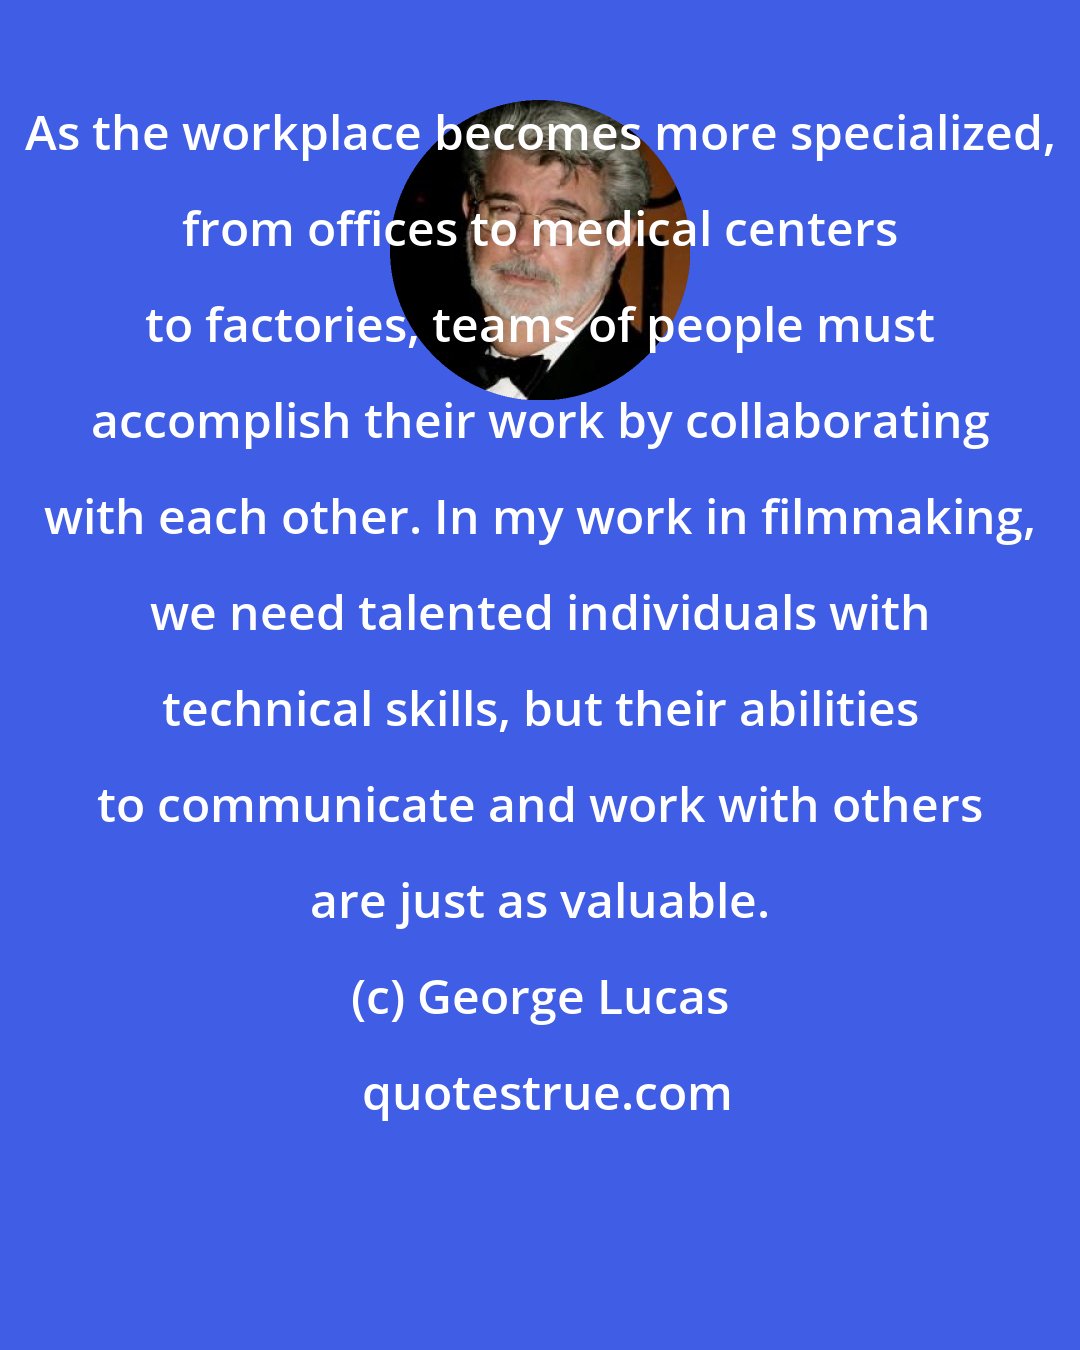 George Lucas: As the workplace becomes more specialized, from offices to medical centers to factories, teams of people must accomplish their work by collaborating with each other. In my work in filmmaking, we need talented individuals with technical skills, but their abilities to communicate and work with others are just as valuable.